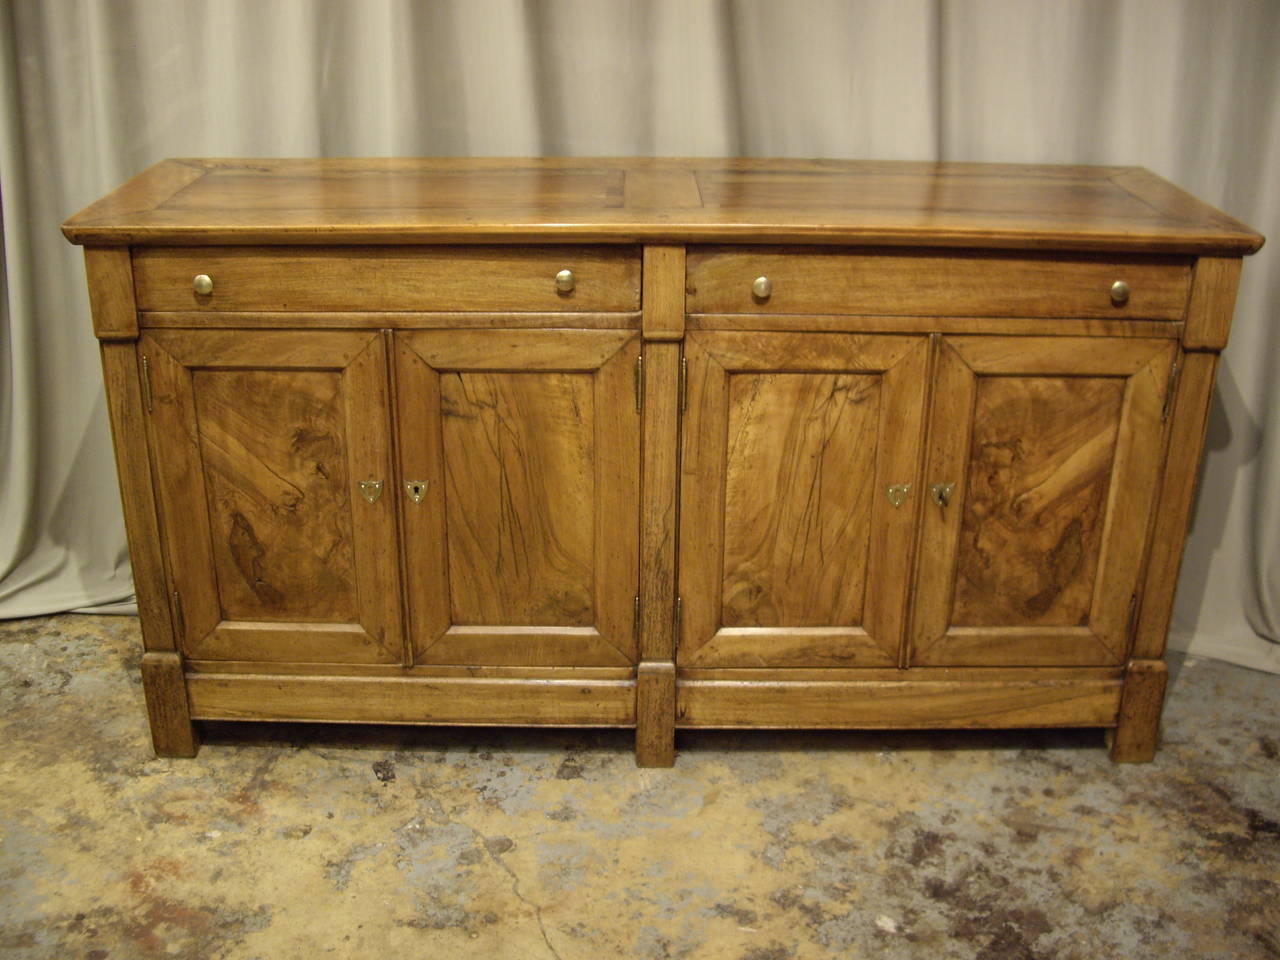 Beautiful honey colored early 19th century walnut French enfilade sideboard.